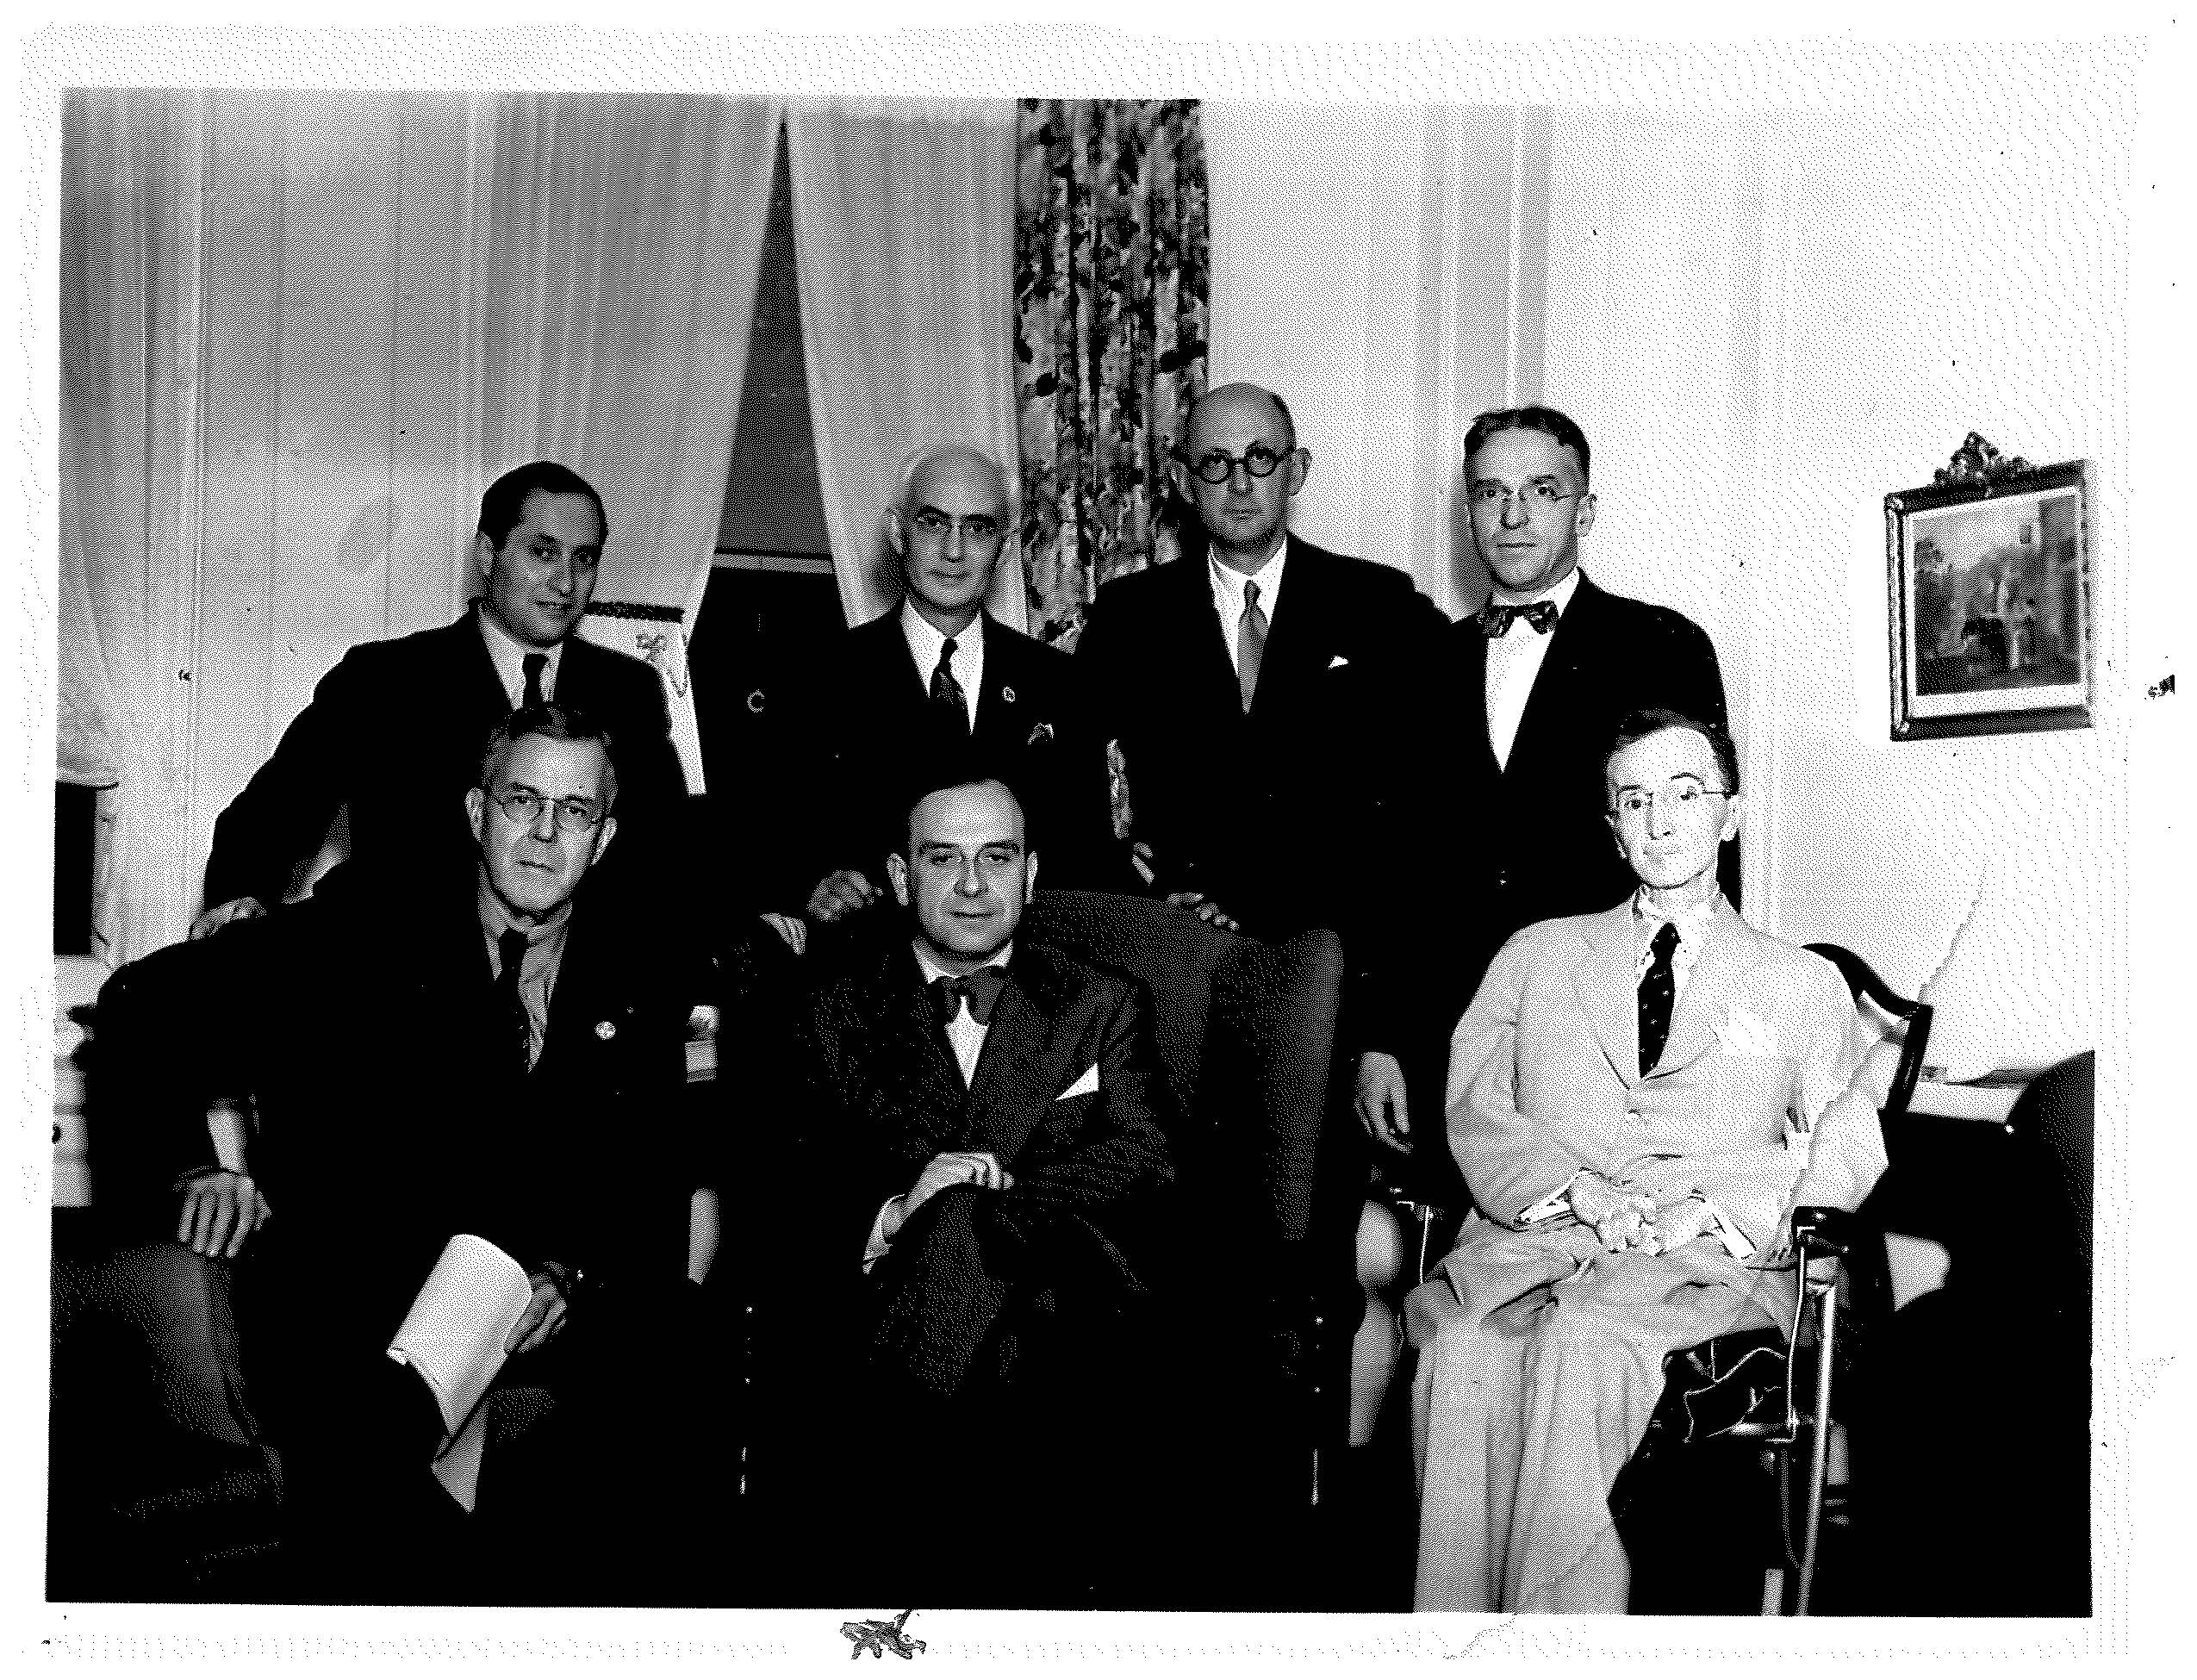 IARS Congress, 1934 at the McAlpin Hotel – Dr. Francis McMechan and honored guest from Germany, Dr. Philip Mueller